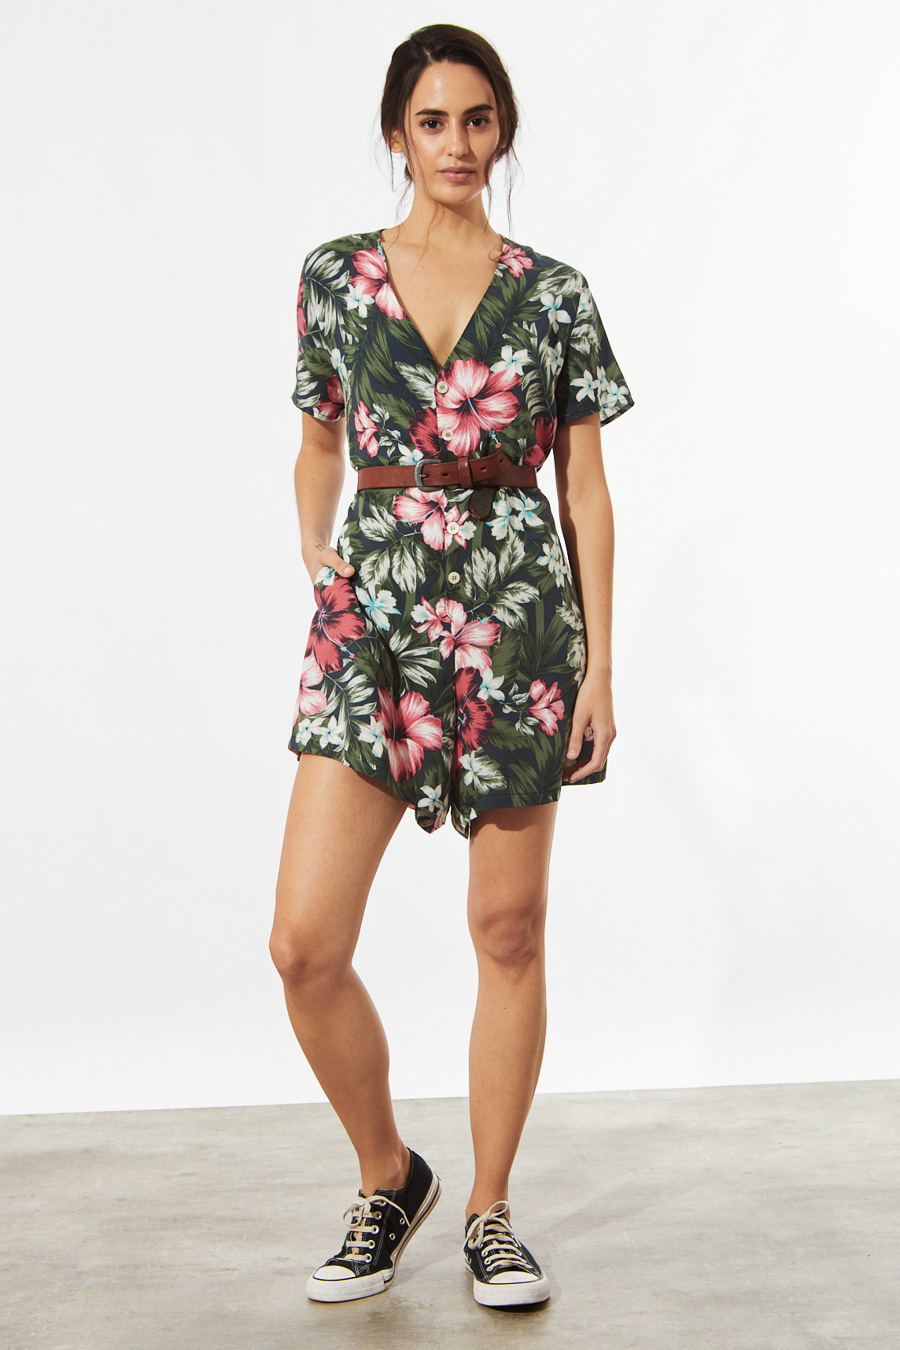 johnlcook_playsuit-orleans-new_48-25-2022__picture-10700